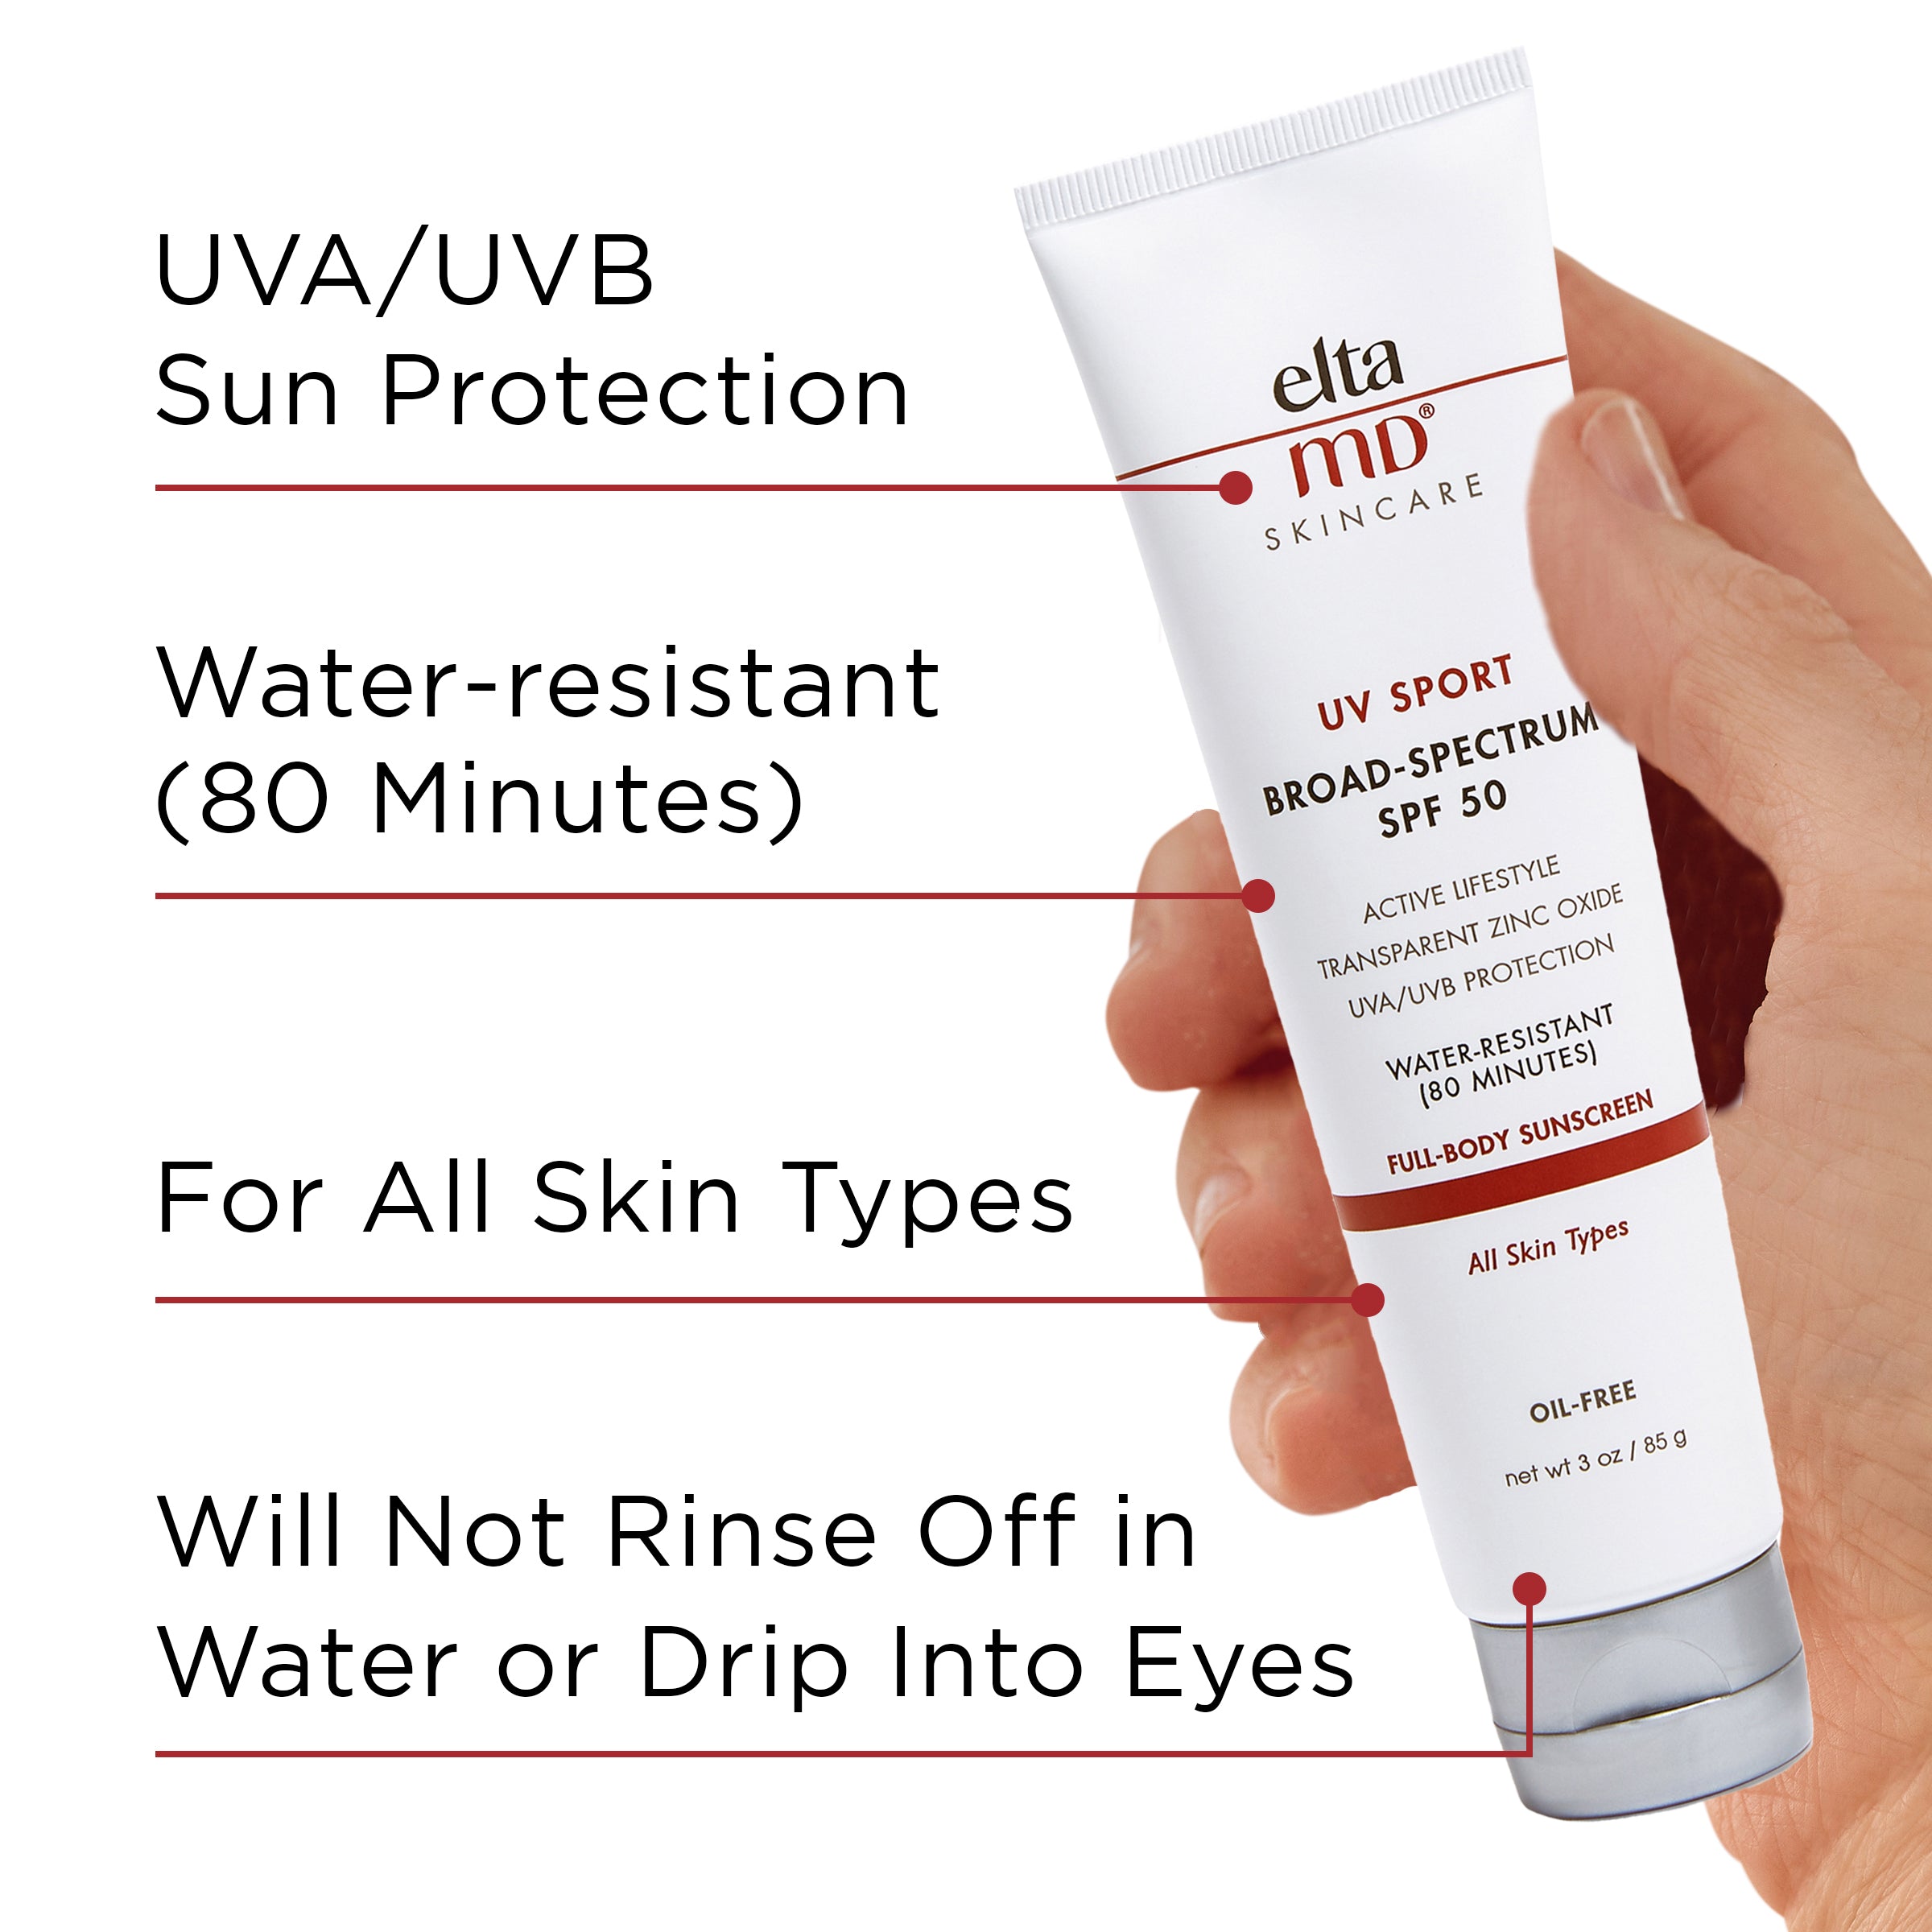 UVA/UVB Sun Protections. Great for all outdoor activities. 3oz